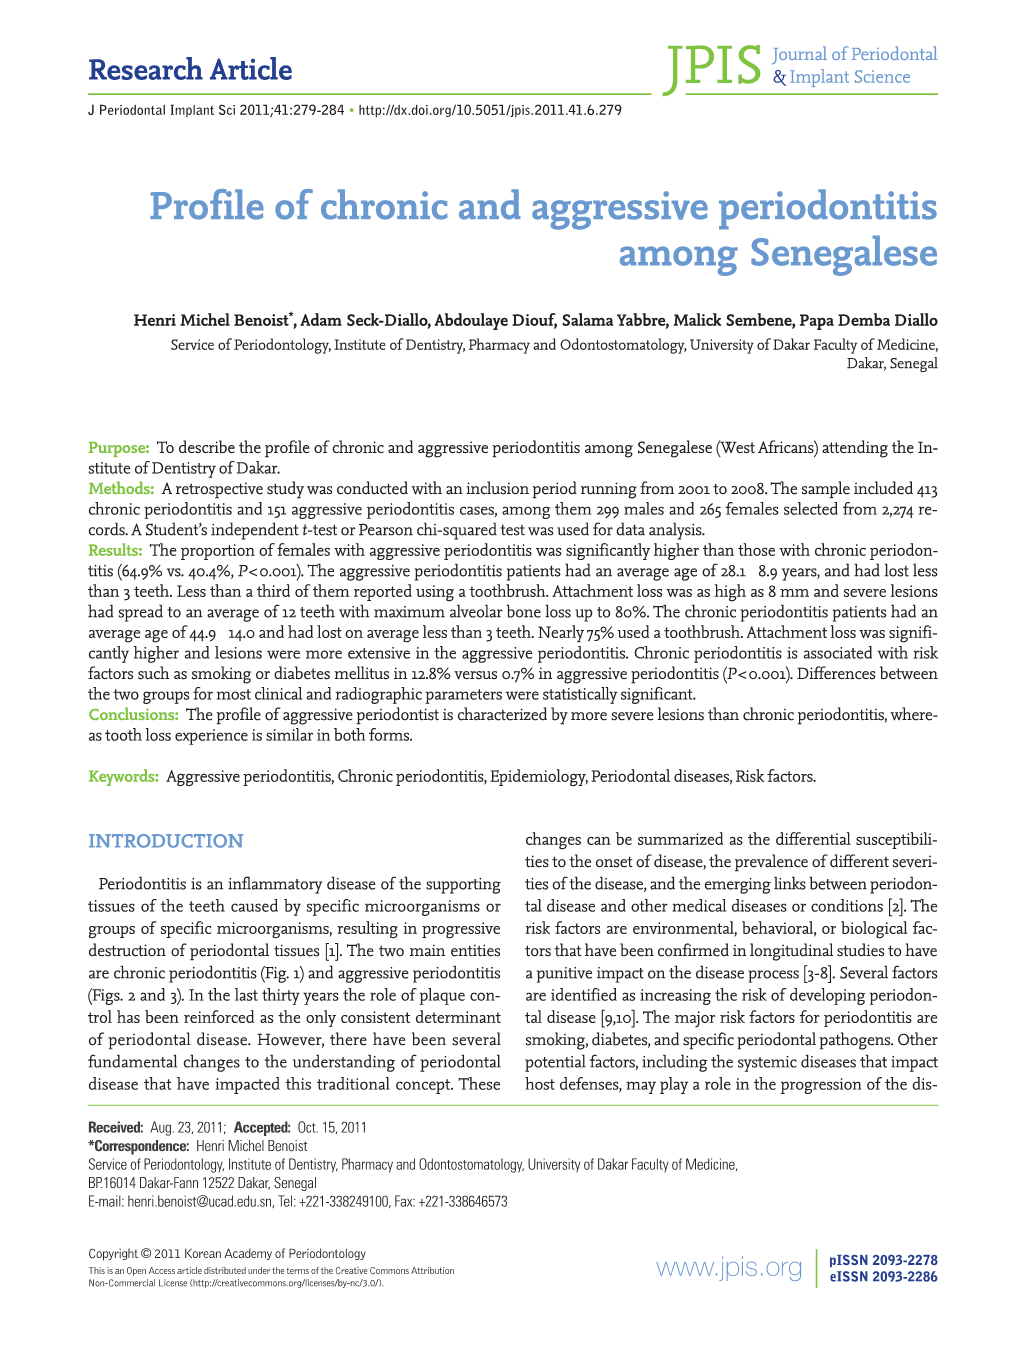 Profile of Chronic and Aggressive Periodontitis Among Senegalese